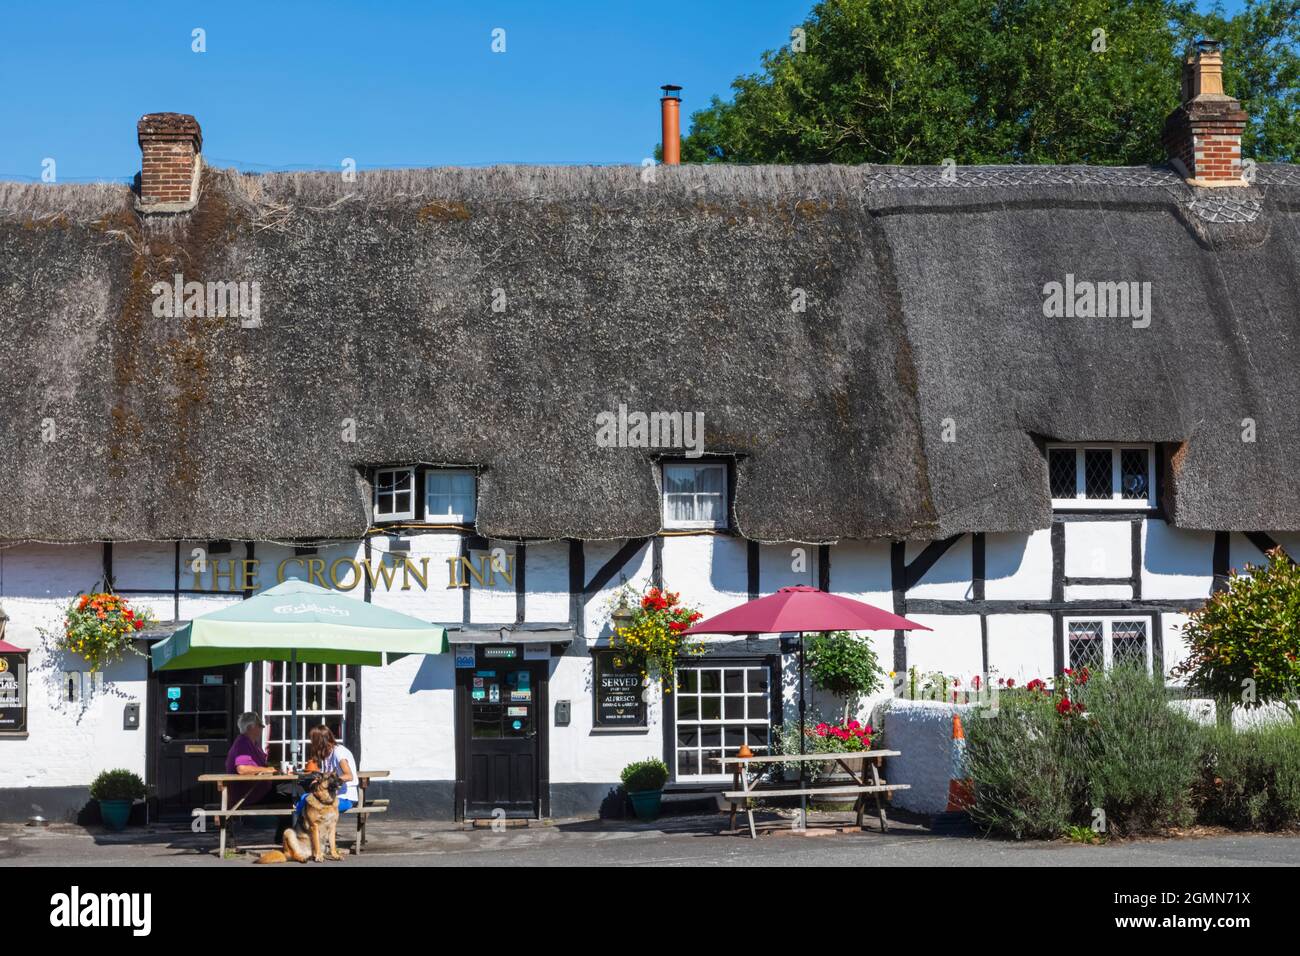 England, Hampshire, Test Valley, Stockbridge, King's Somborne, The Crown Inn Traditional Thatched Country Pub Stock Photo